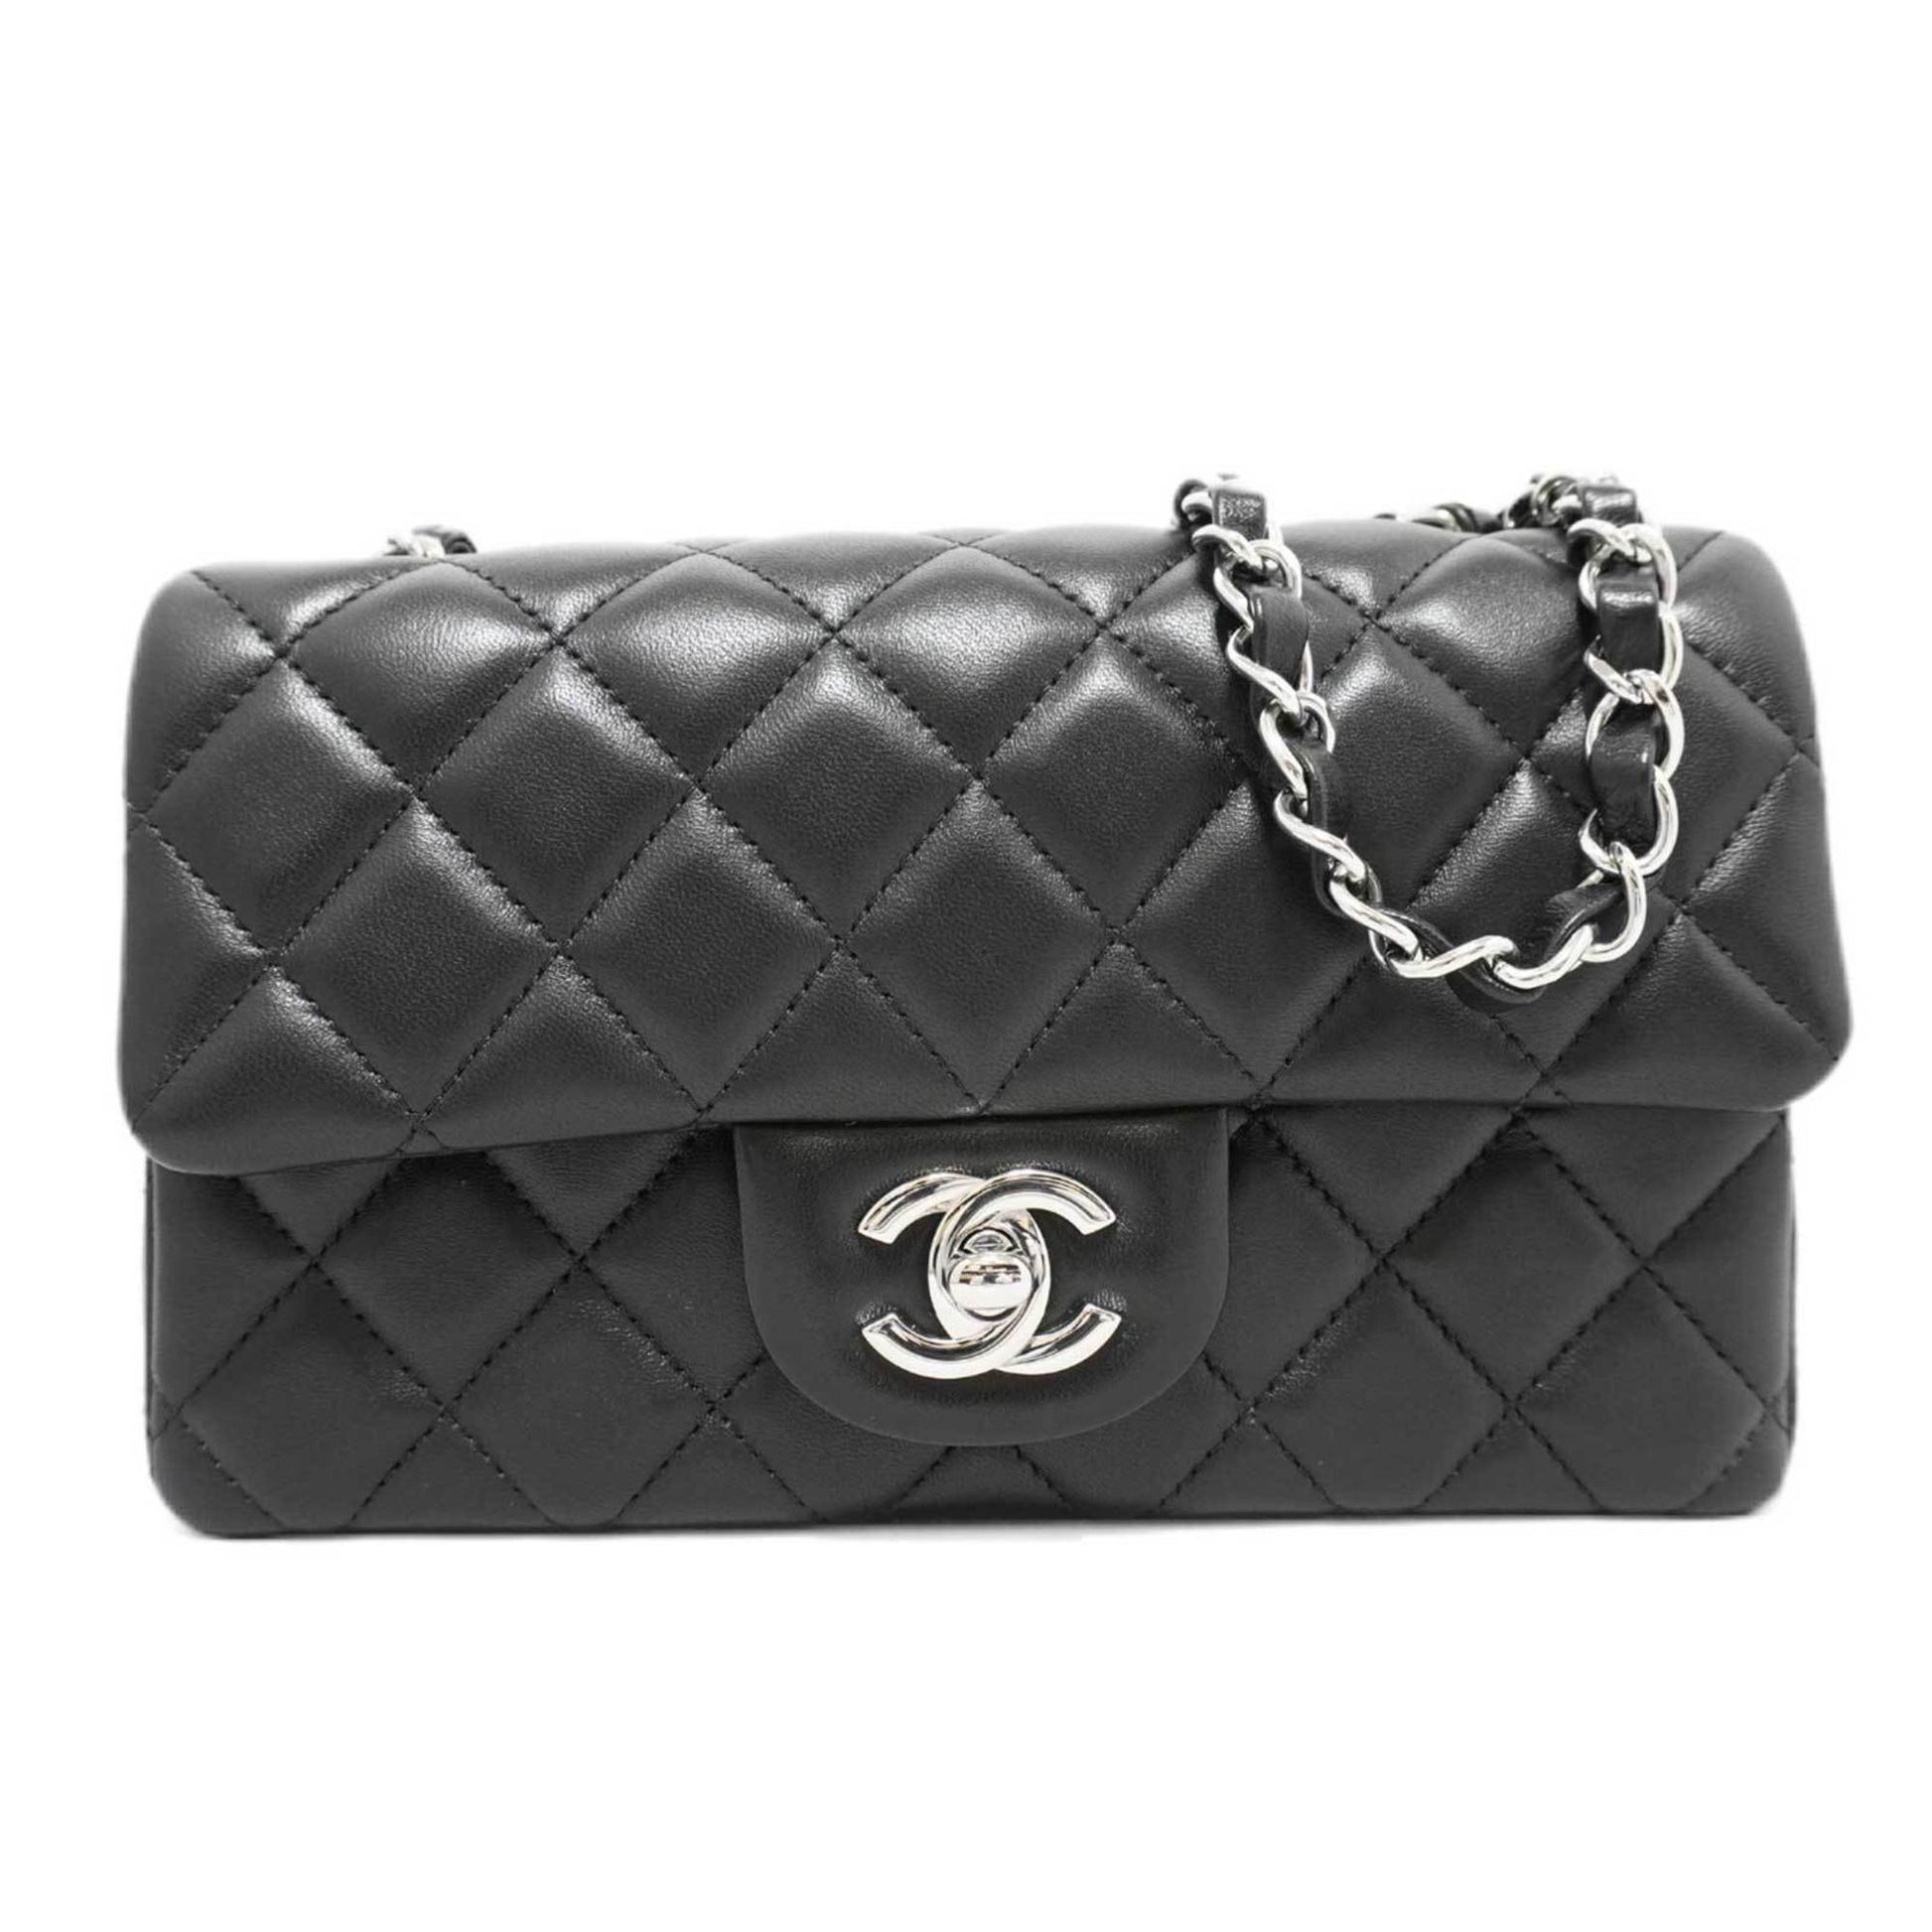 CHANEL Full Chain Flap Shoulder Bag Black Clutch Quilted Lambskin